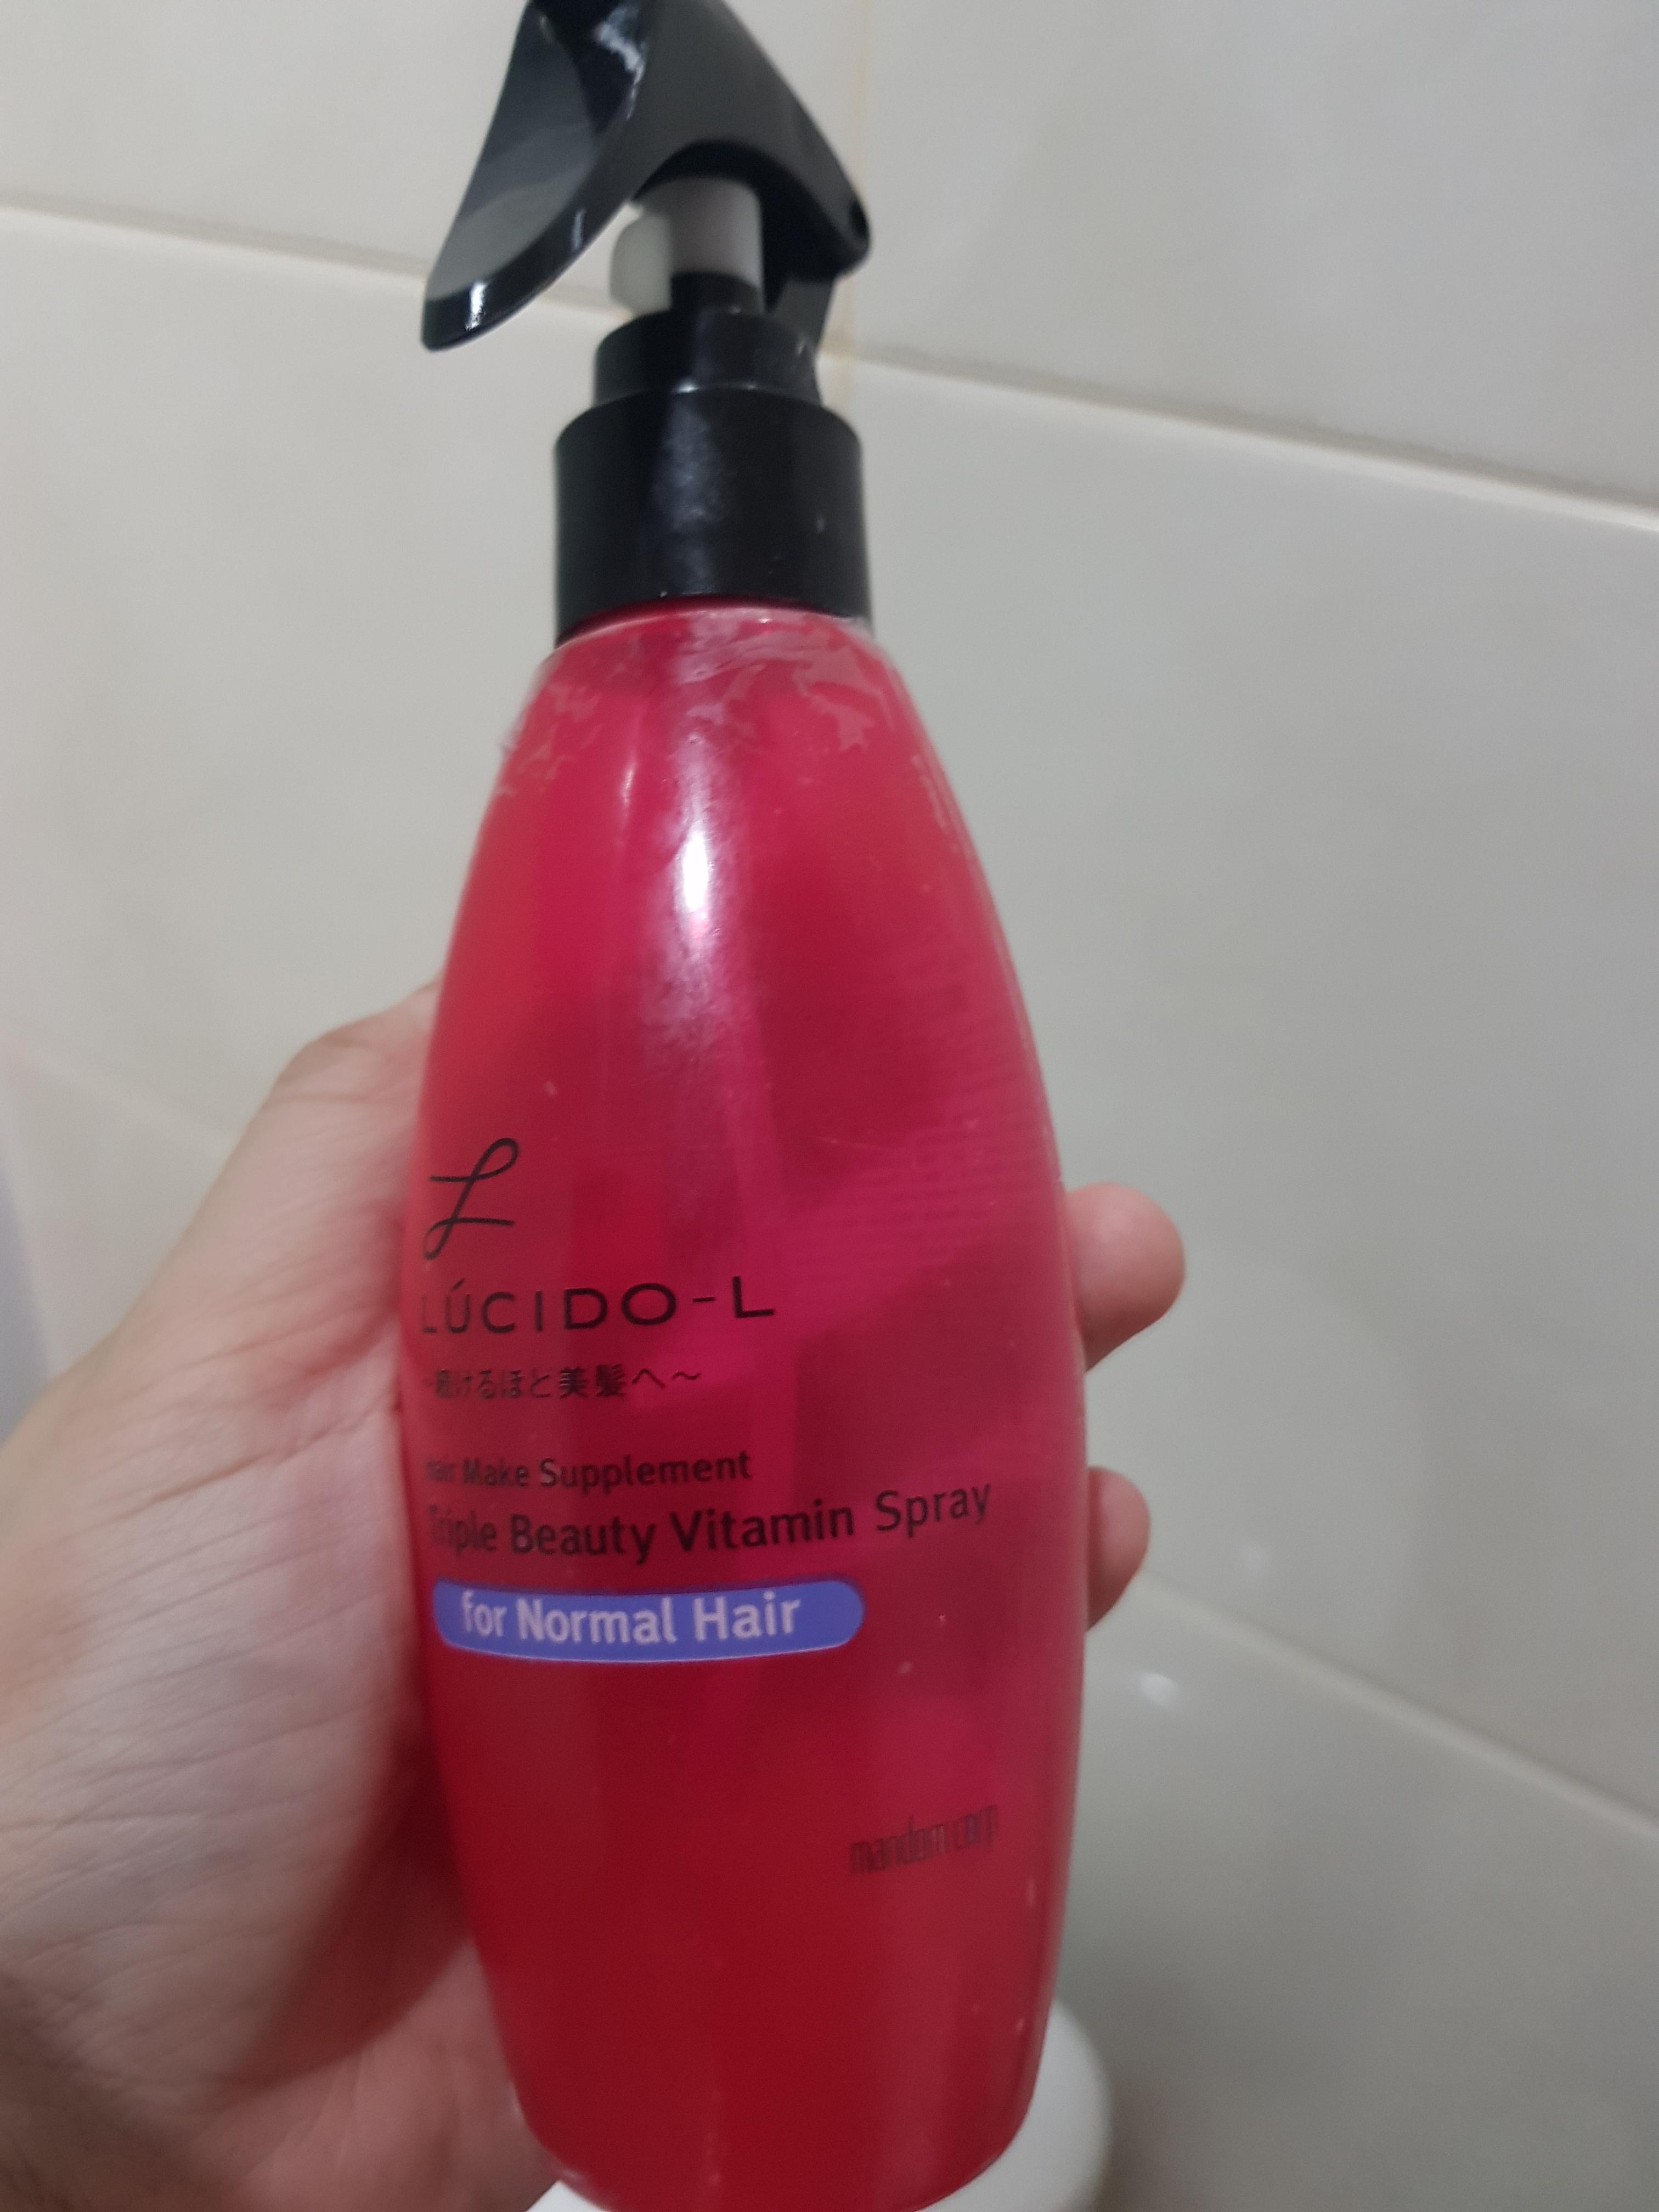 Hair vitamin  spray for dry hair rambut  kering  by Lucido  